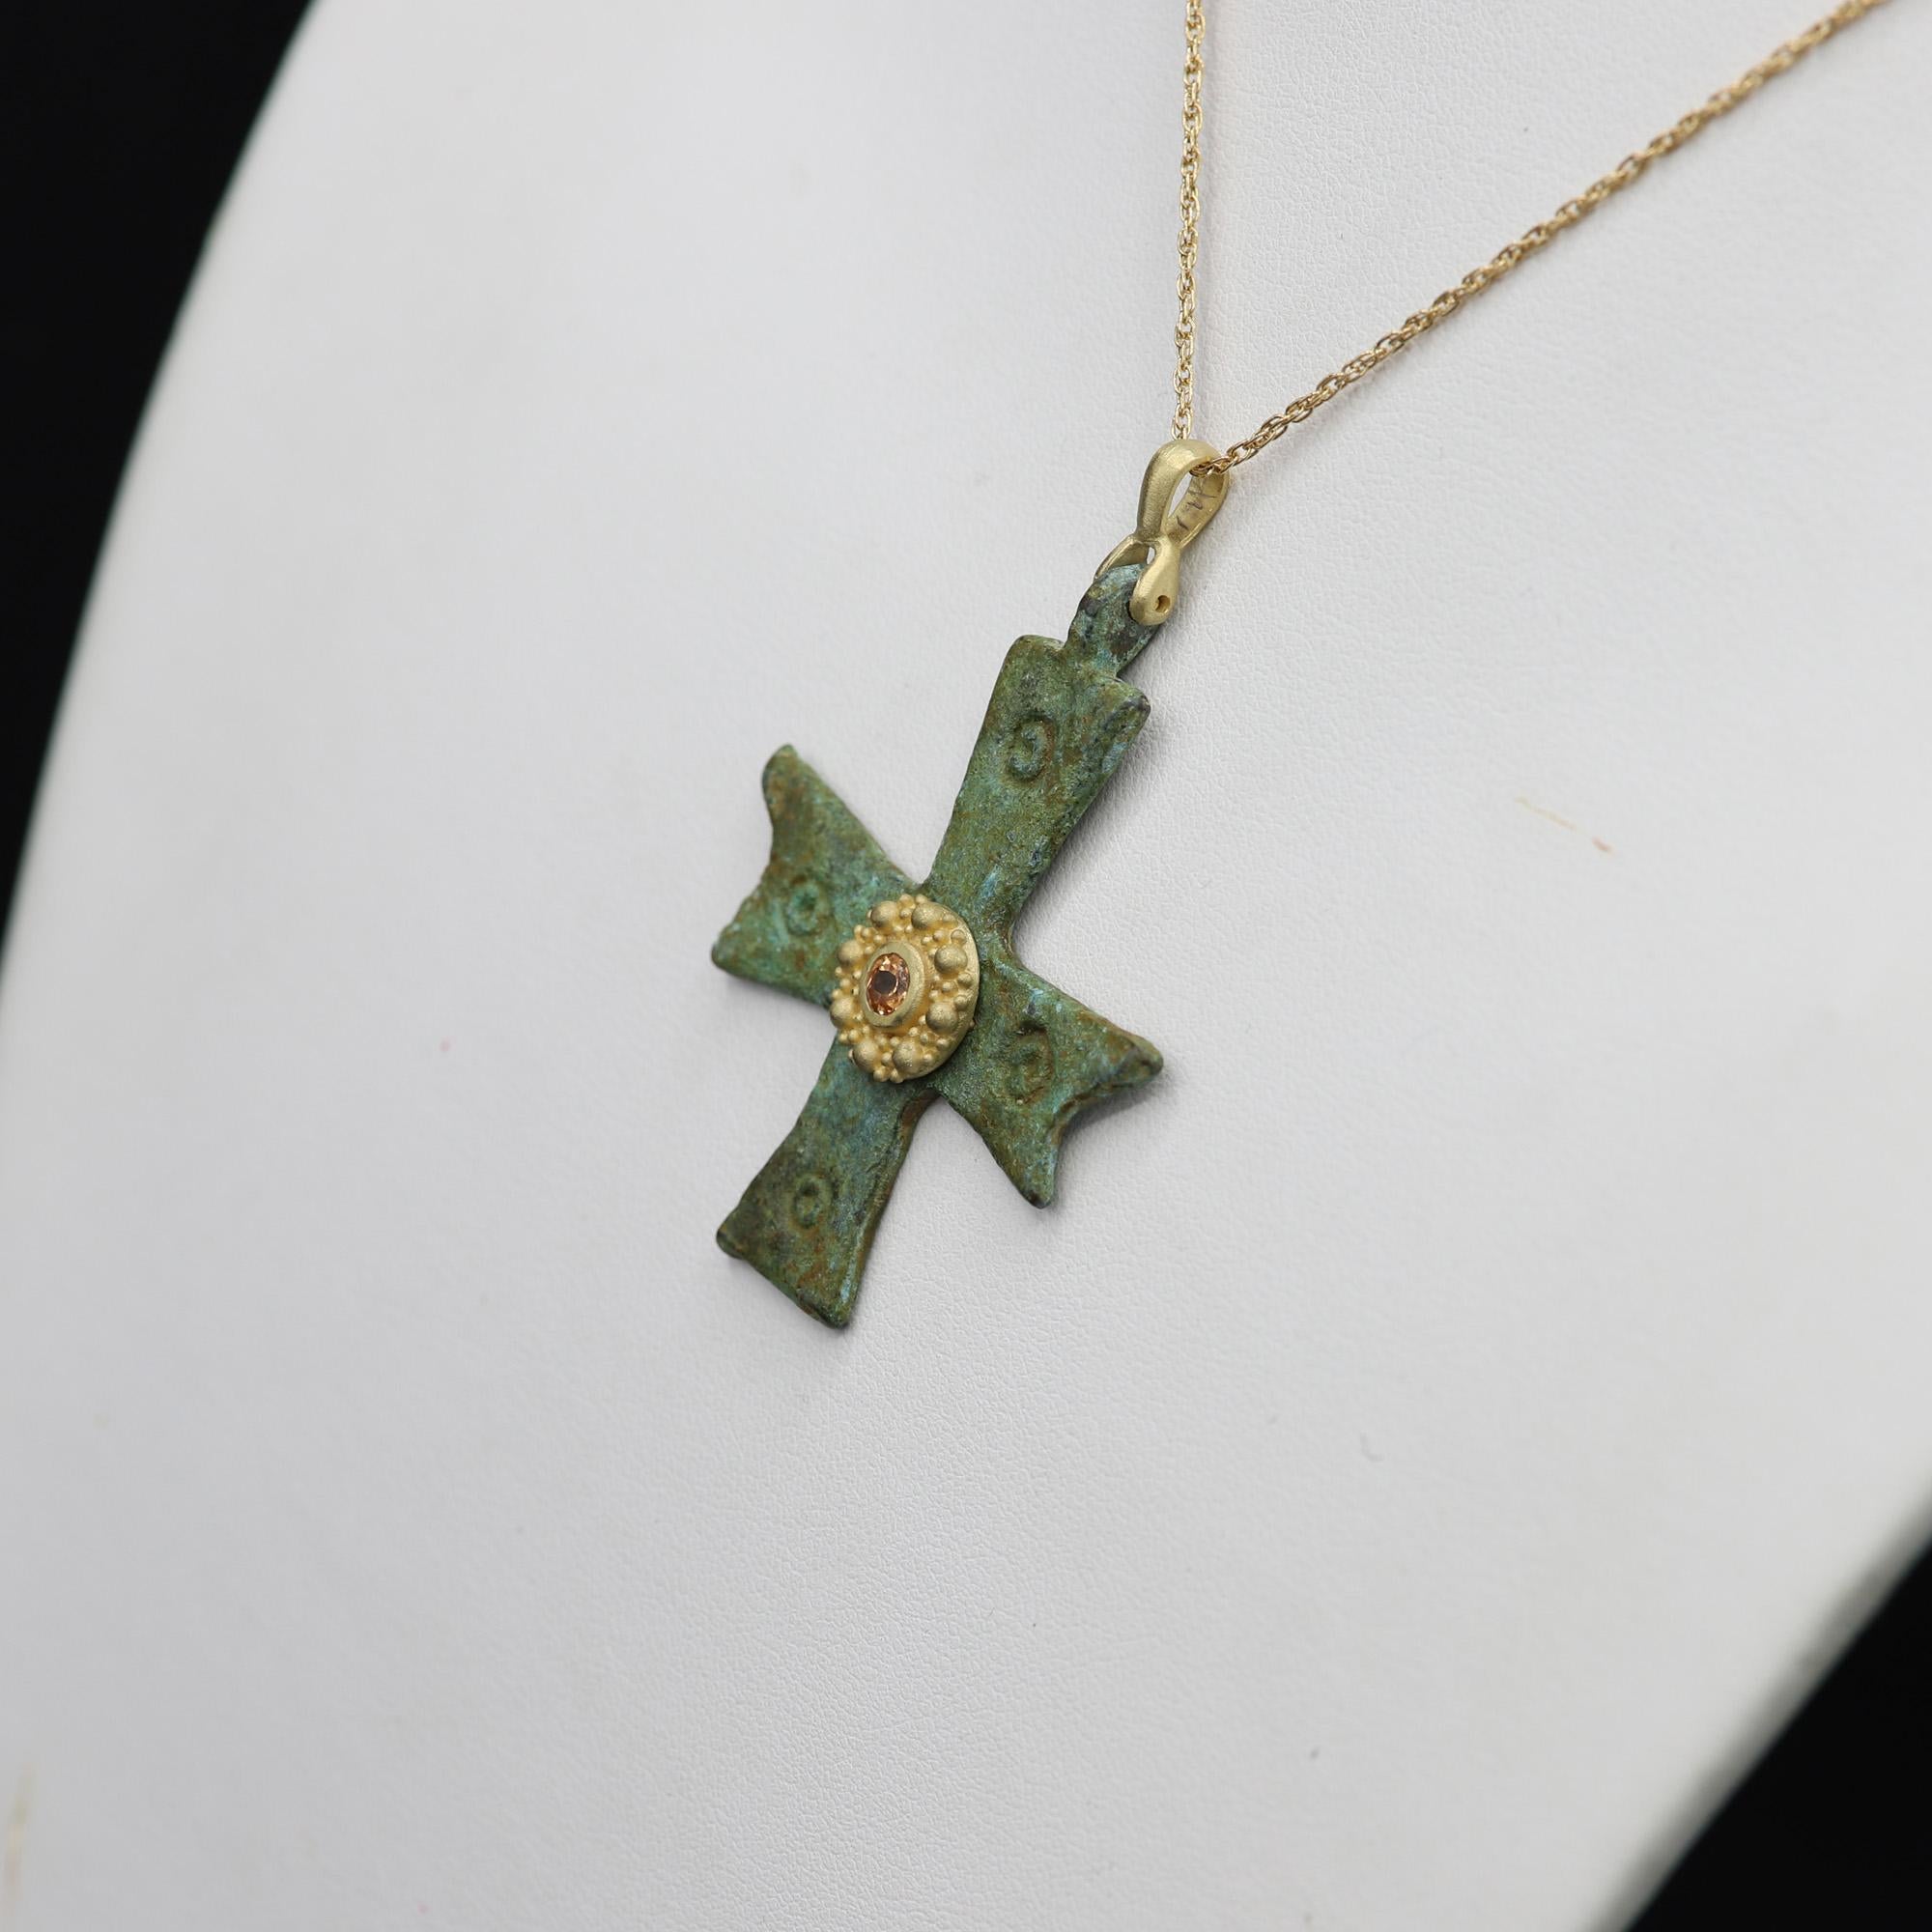 Magnificent piece of History - can be yours today !
Ancient Byzantine Period cross.
Hand set in Italy with 18k Yellow Gold & Yellow Sapphire.
Approx size 1' inch / 25 mm.
This Antique Bronze Cross is estimated from 600-900 AD 
Chain not Included 